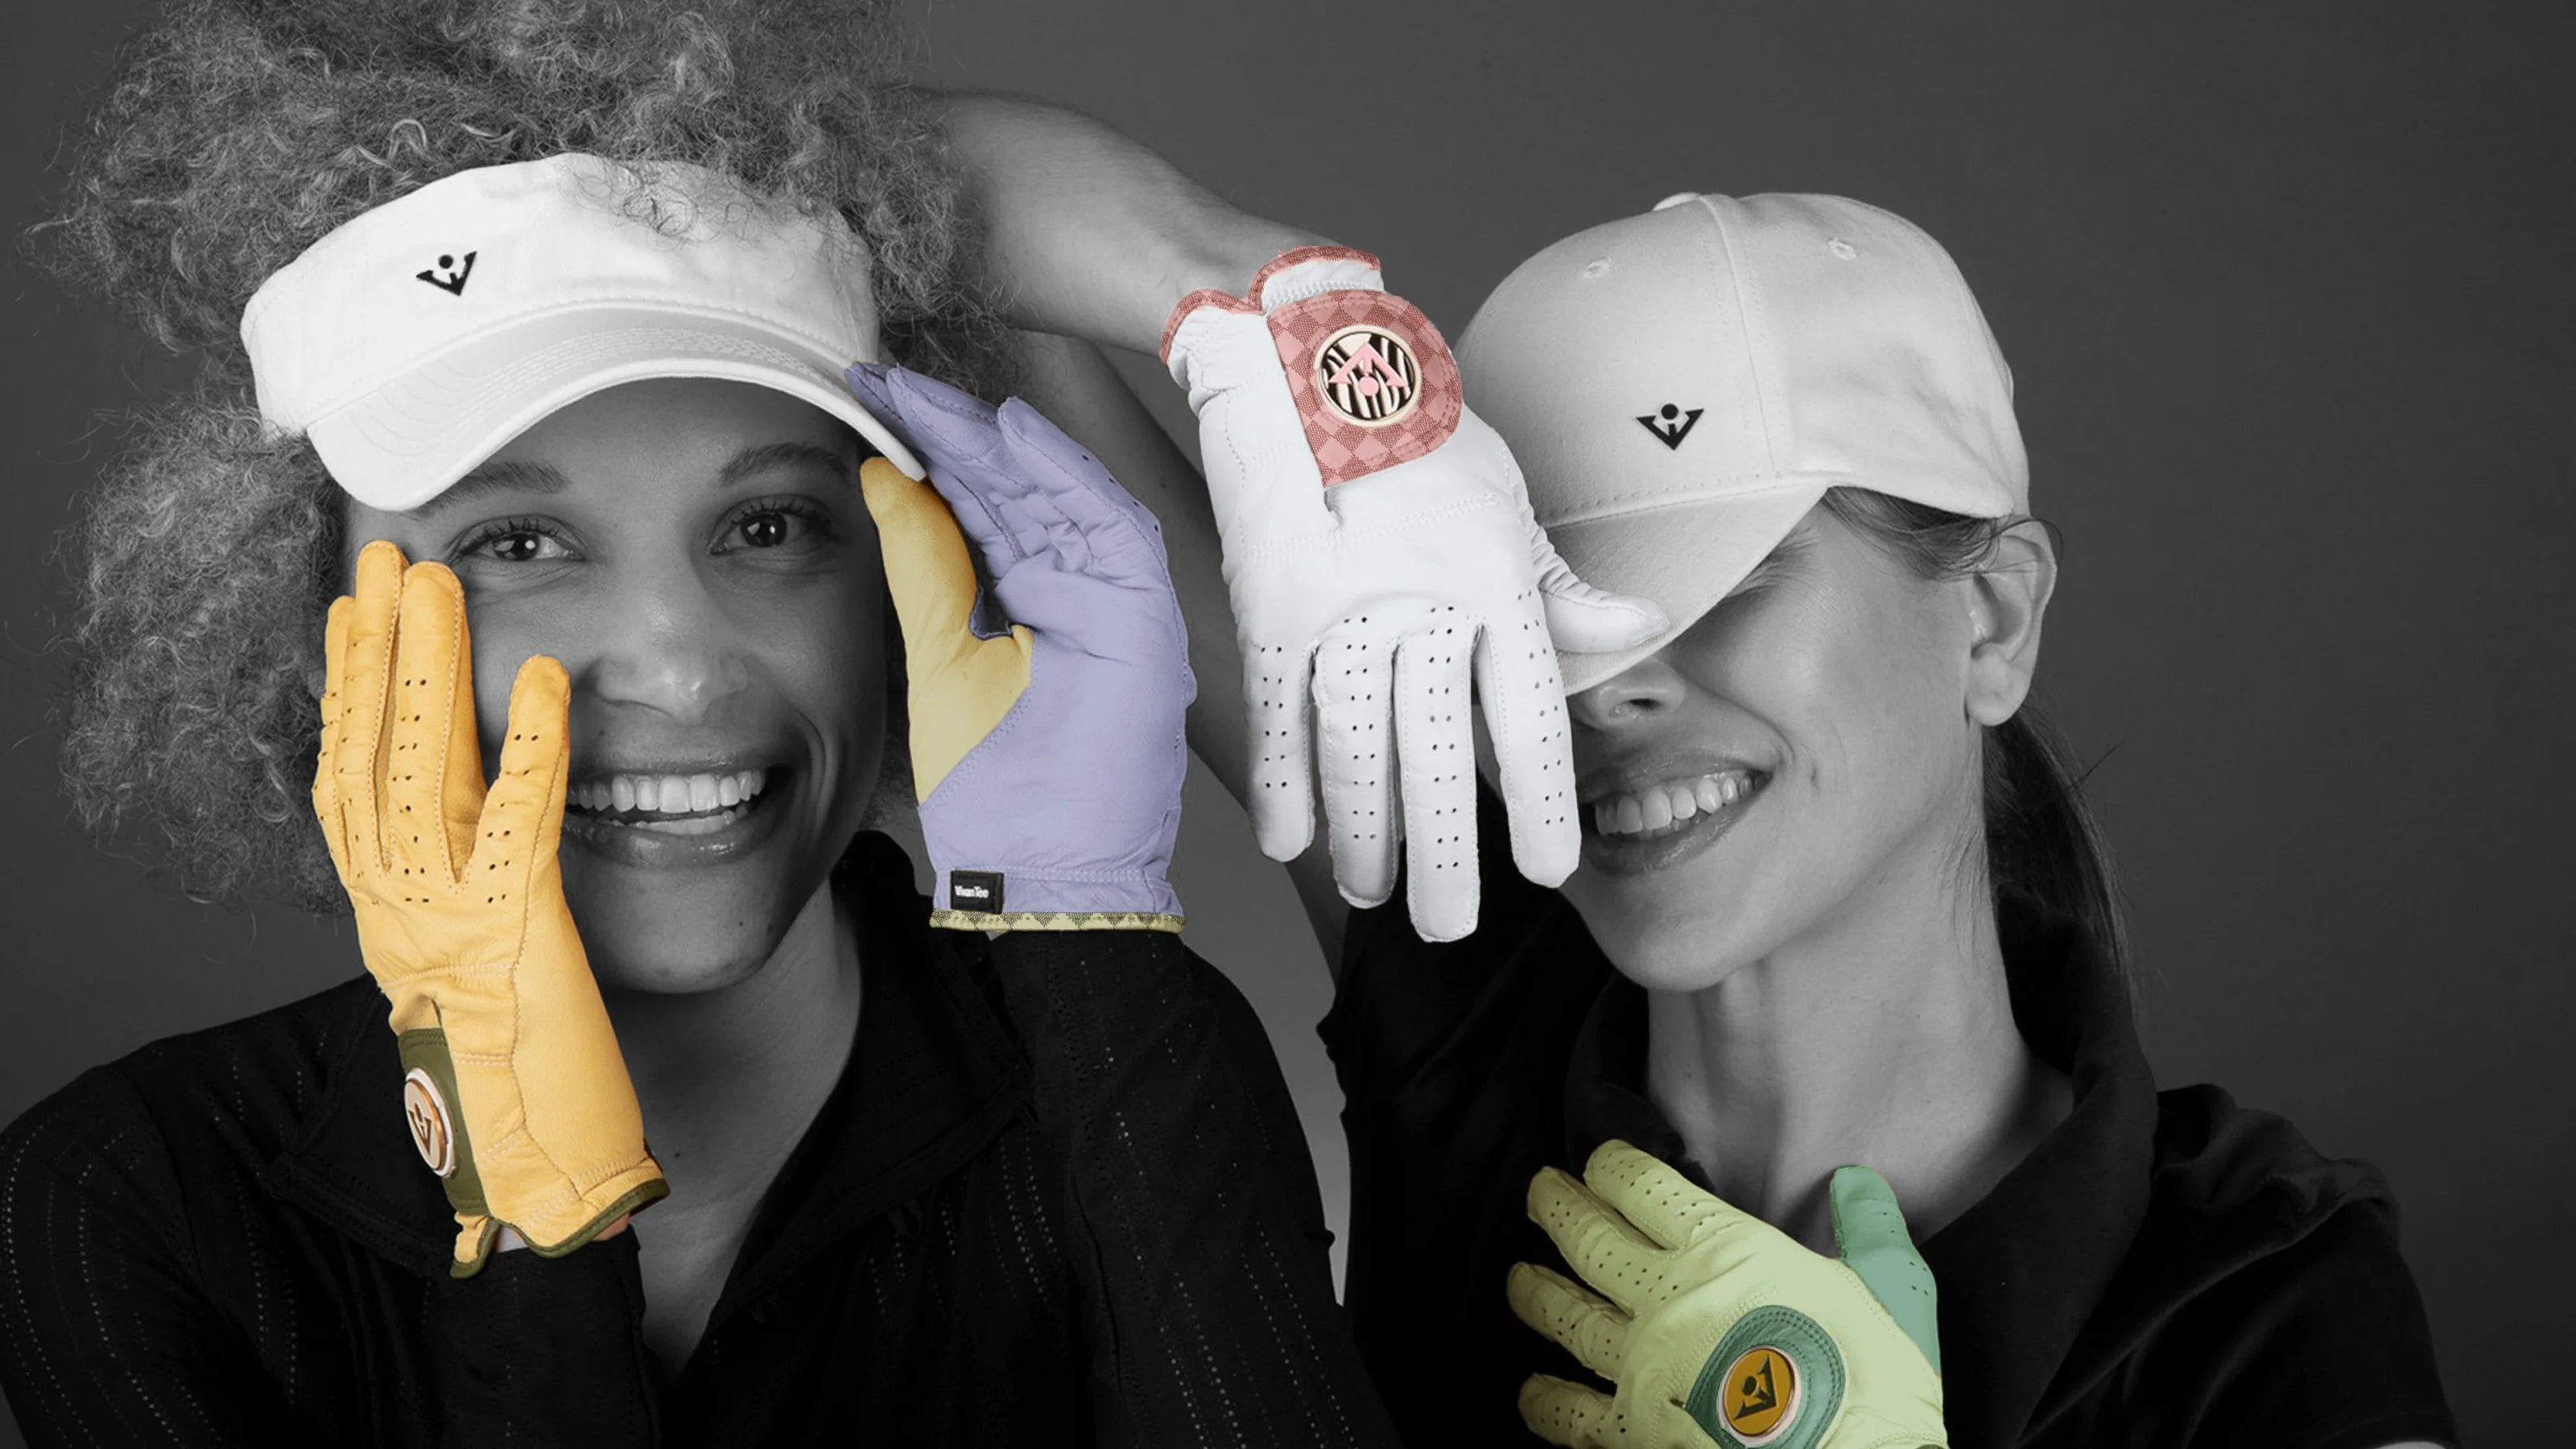 Two women wearing VivanTee Golf gloves with magnetic ball markers in different colors and posing in a fun outgoing way, with a monochromatic background showing the unique colored golf gloves.